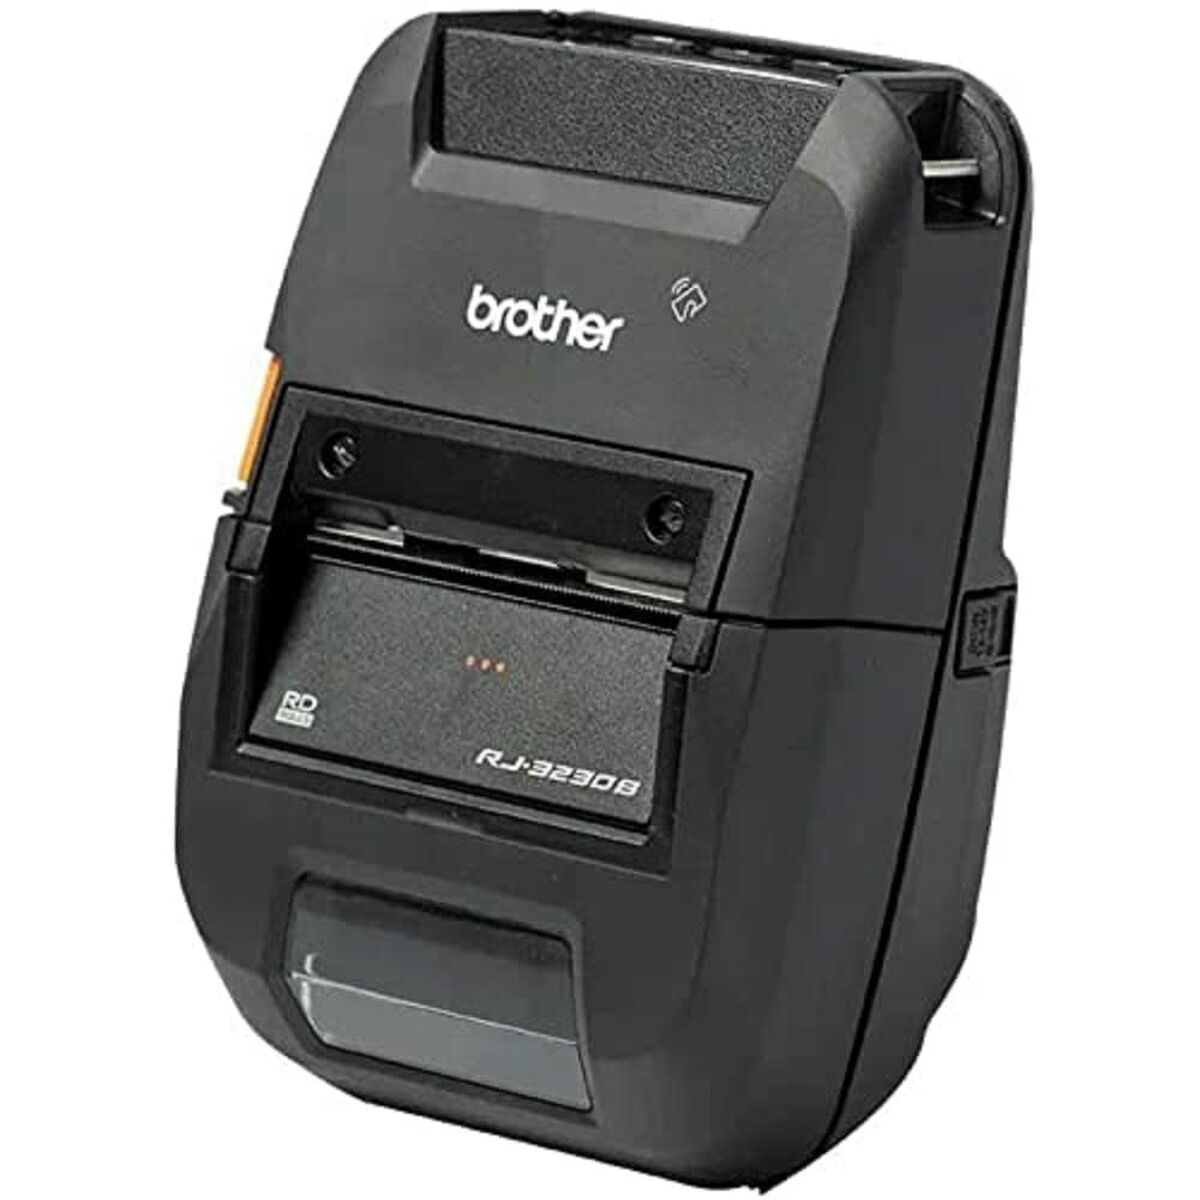 Photogrpahic Printer Brother RJ3230BLZ1, Brother, Computing, Printers and accessories, photogrpahic-printer-brother-rj3230blz1, :Photographic Printers, Brand_Brother, category-reference-2609, category-reference-2642, category-reference-2645, category-reference-t-19685, category-reference-t-19911, category-reference-t-21378, category-reference-t-25694, computers / peripherals, Condition_NEW, office, Price_500 - 600, Teleworking, RiotNook